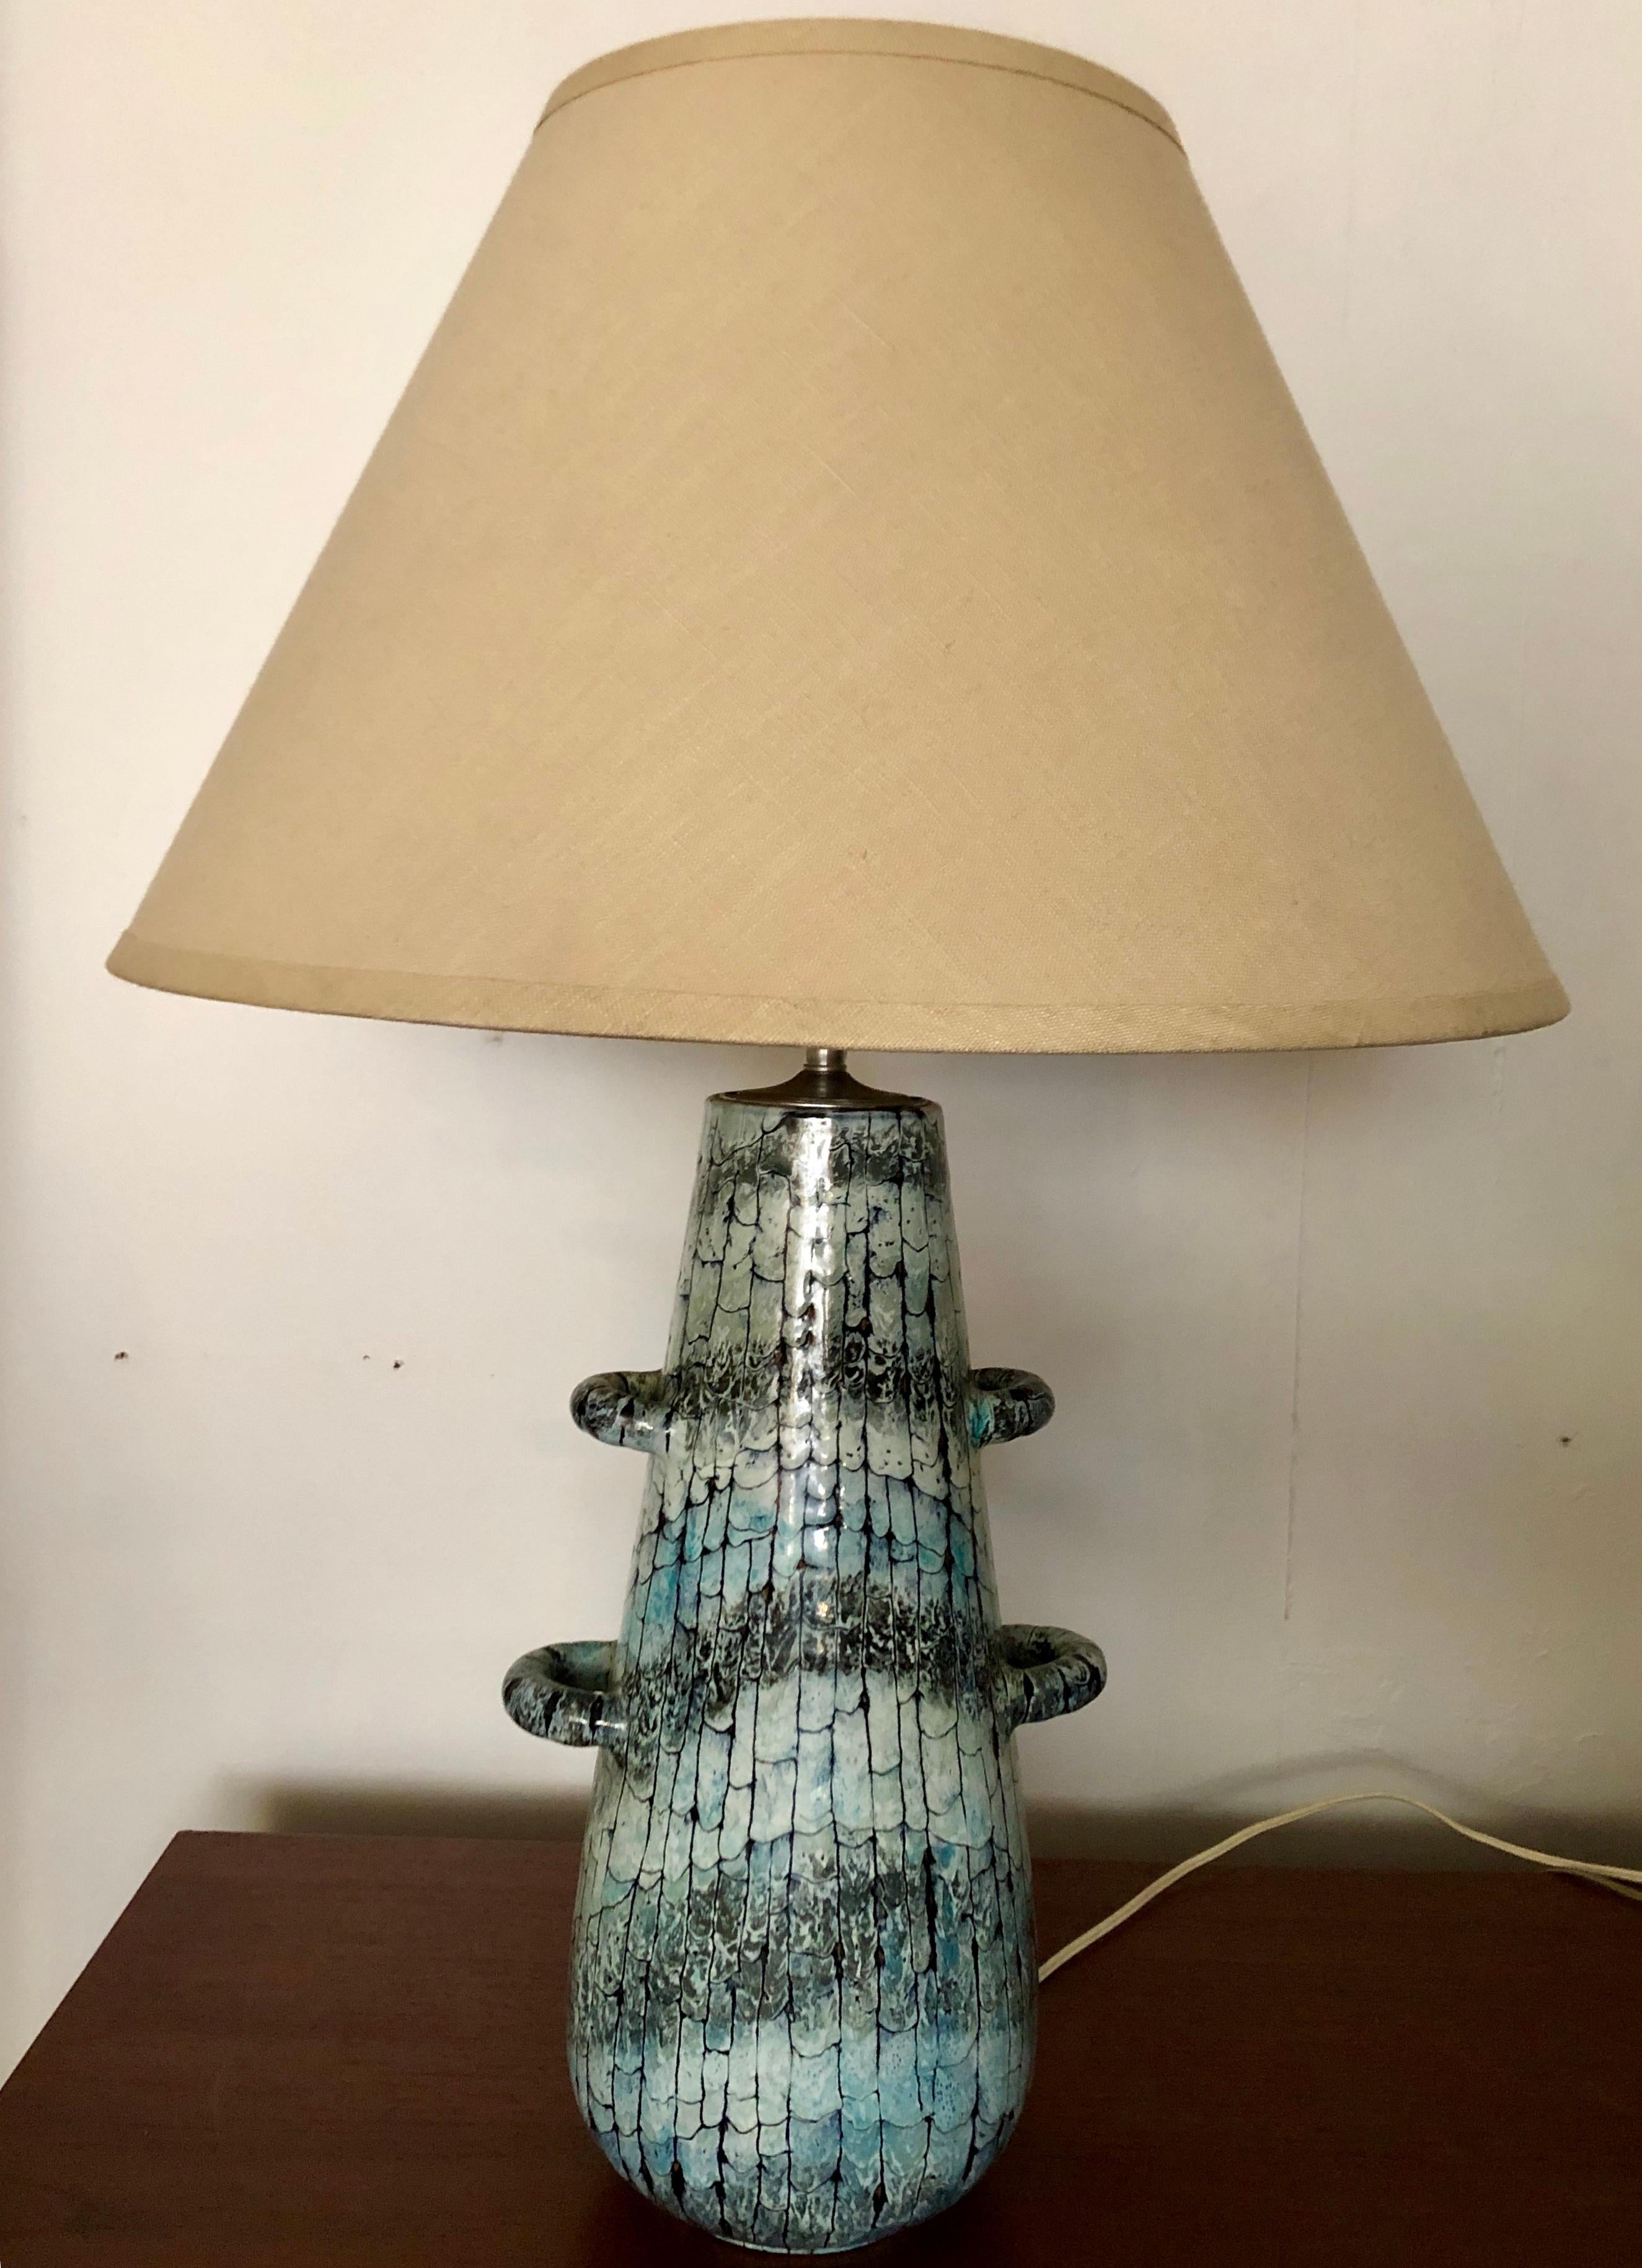 Italian pottery lamp with 4 handles and interesting scalloped faux-craquelure glaze in varying shades of blue/green/charcoal gray. Base is 16